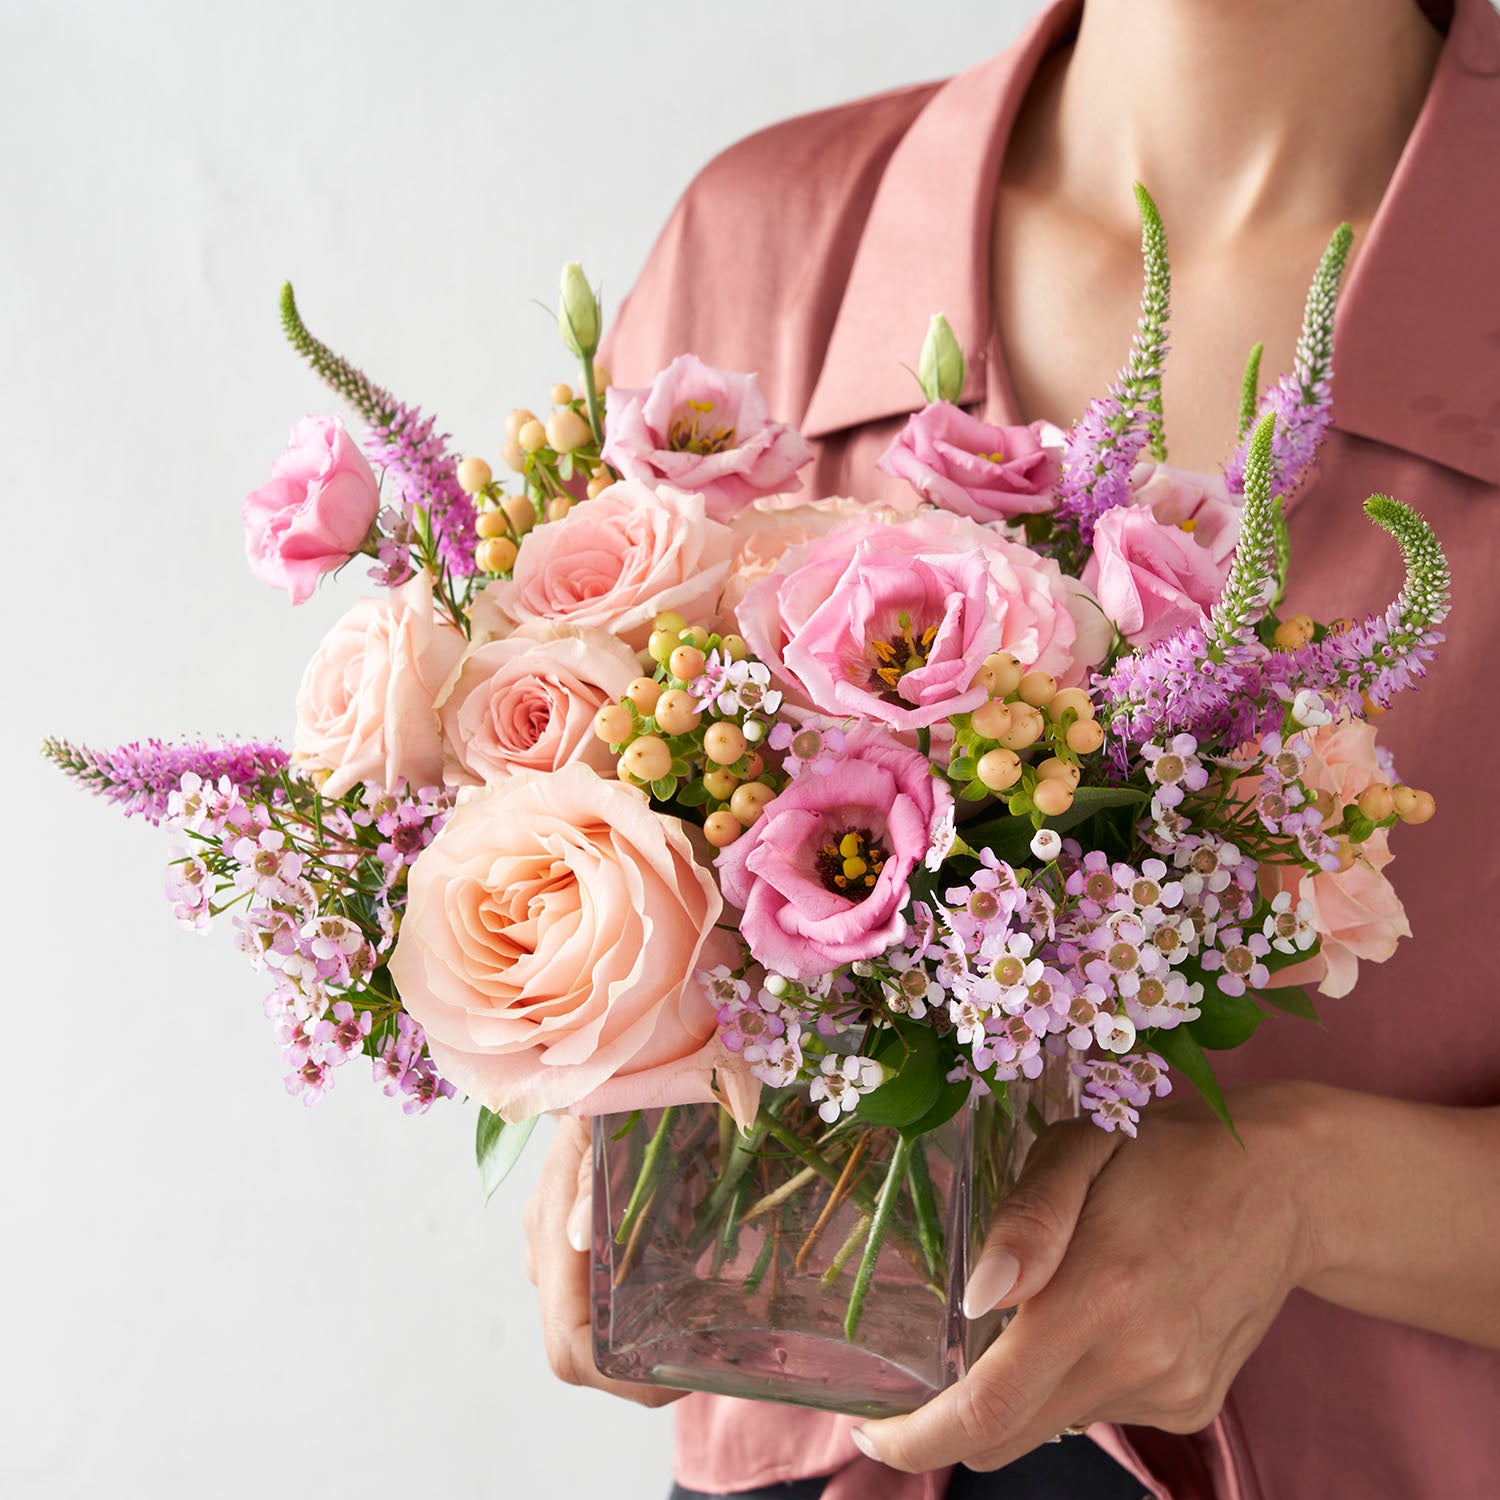 Woman in pink shirt holding pink and peachy pink flower arrangemnt.